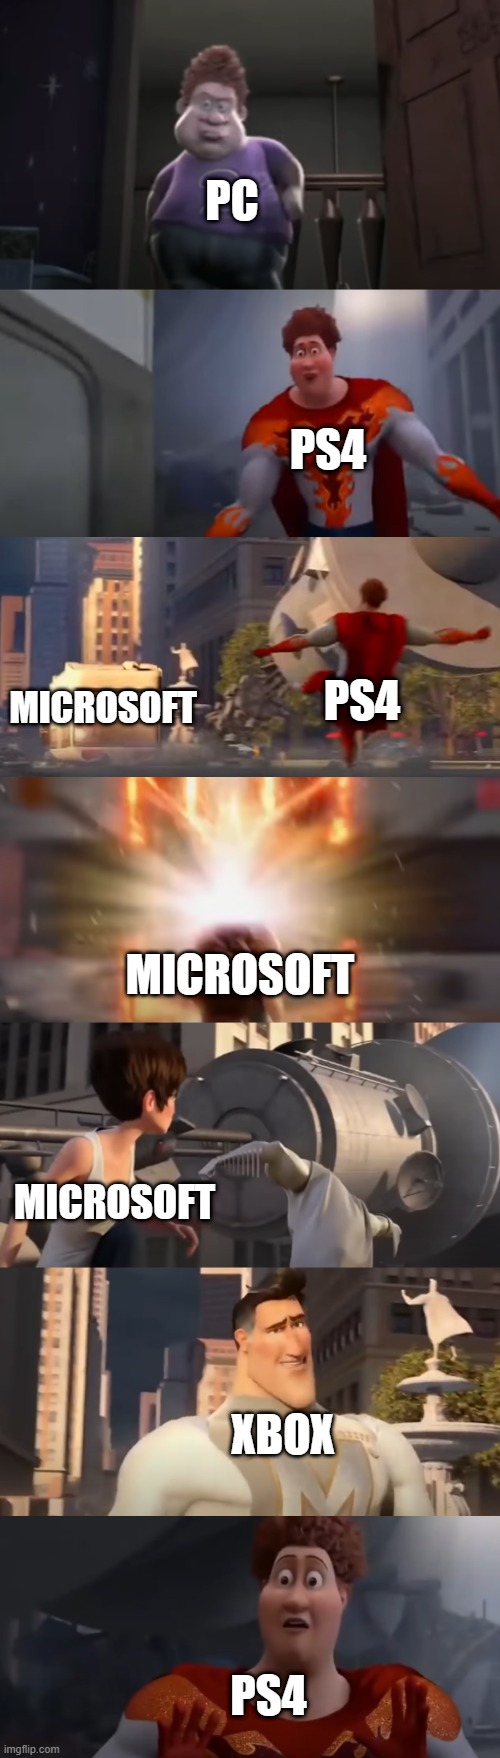 xbox | PC; PS4; PS4; MICROSOFT; MICROSOFT; MICROSOFT; XBOX; PS4 | image tagged in snotty boy glow up meme extended | made w/ Imgflip meme maker